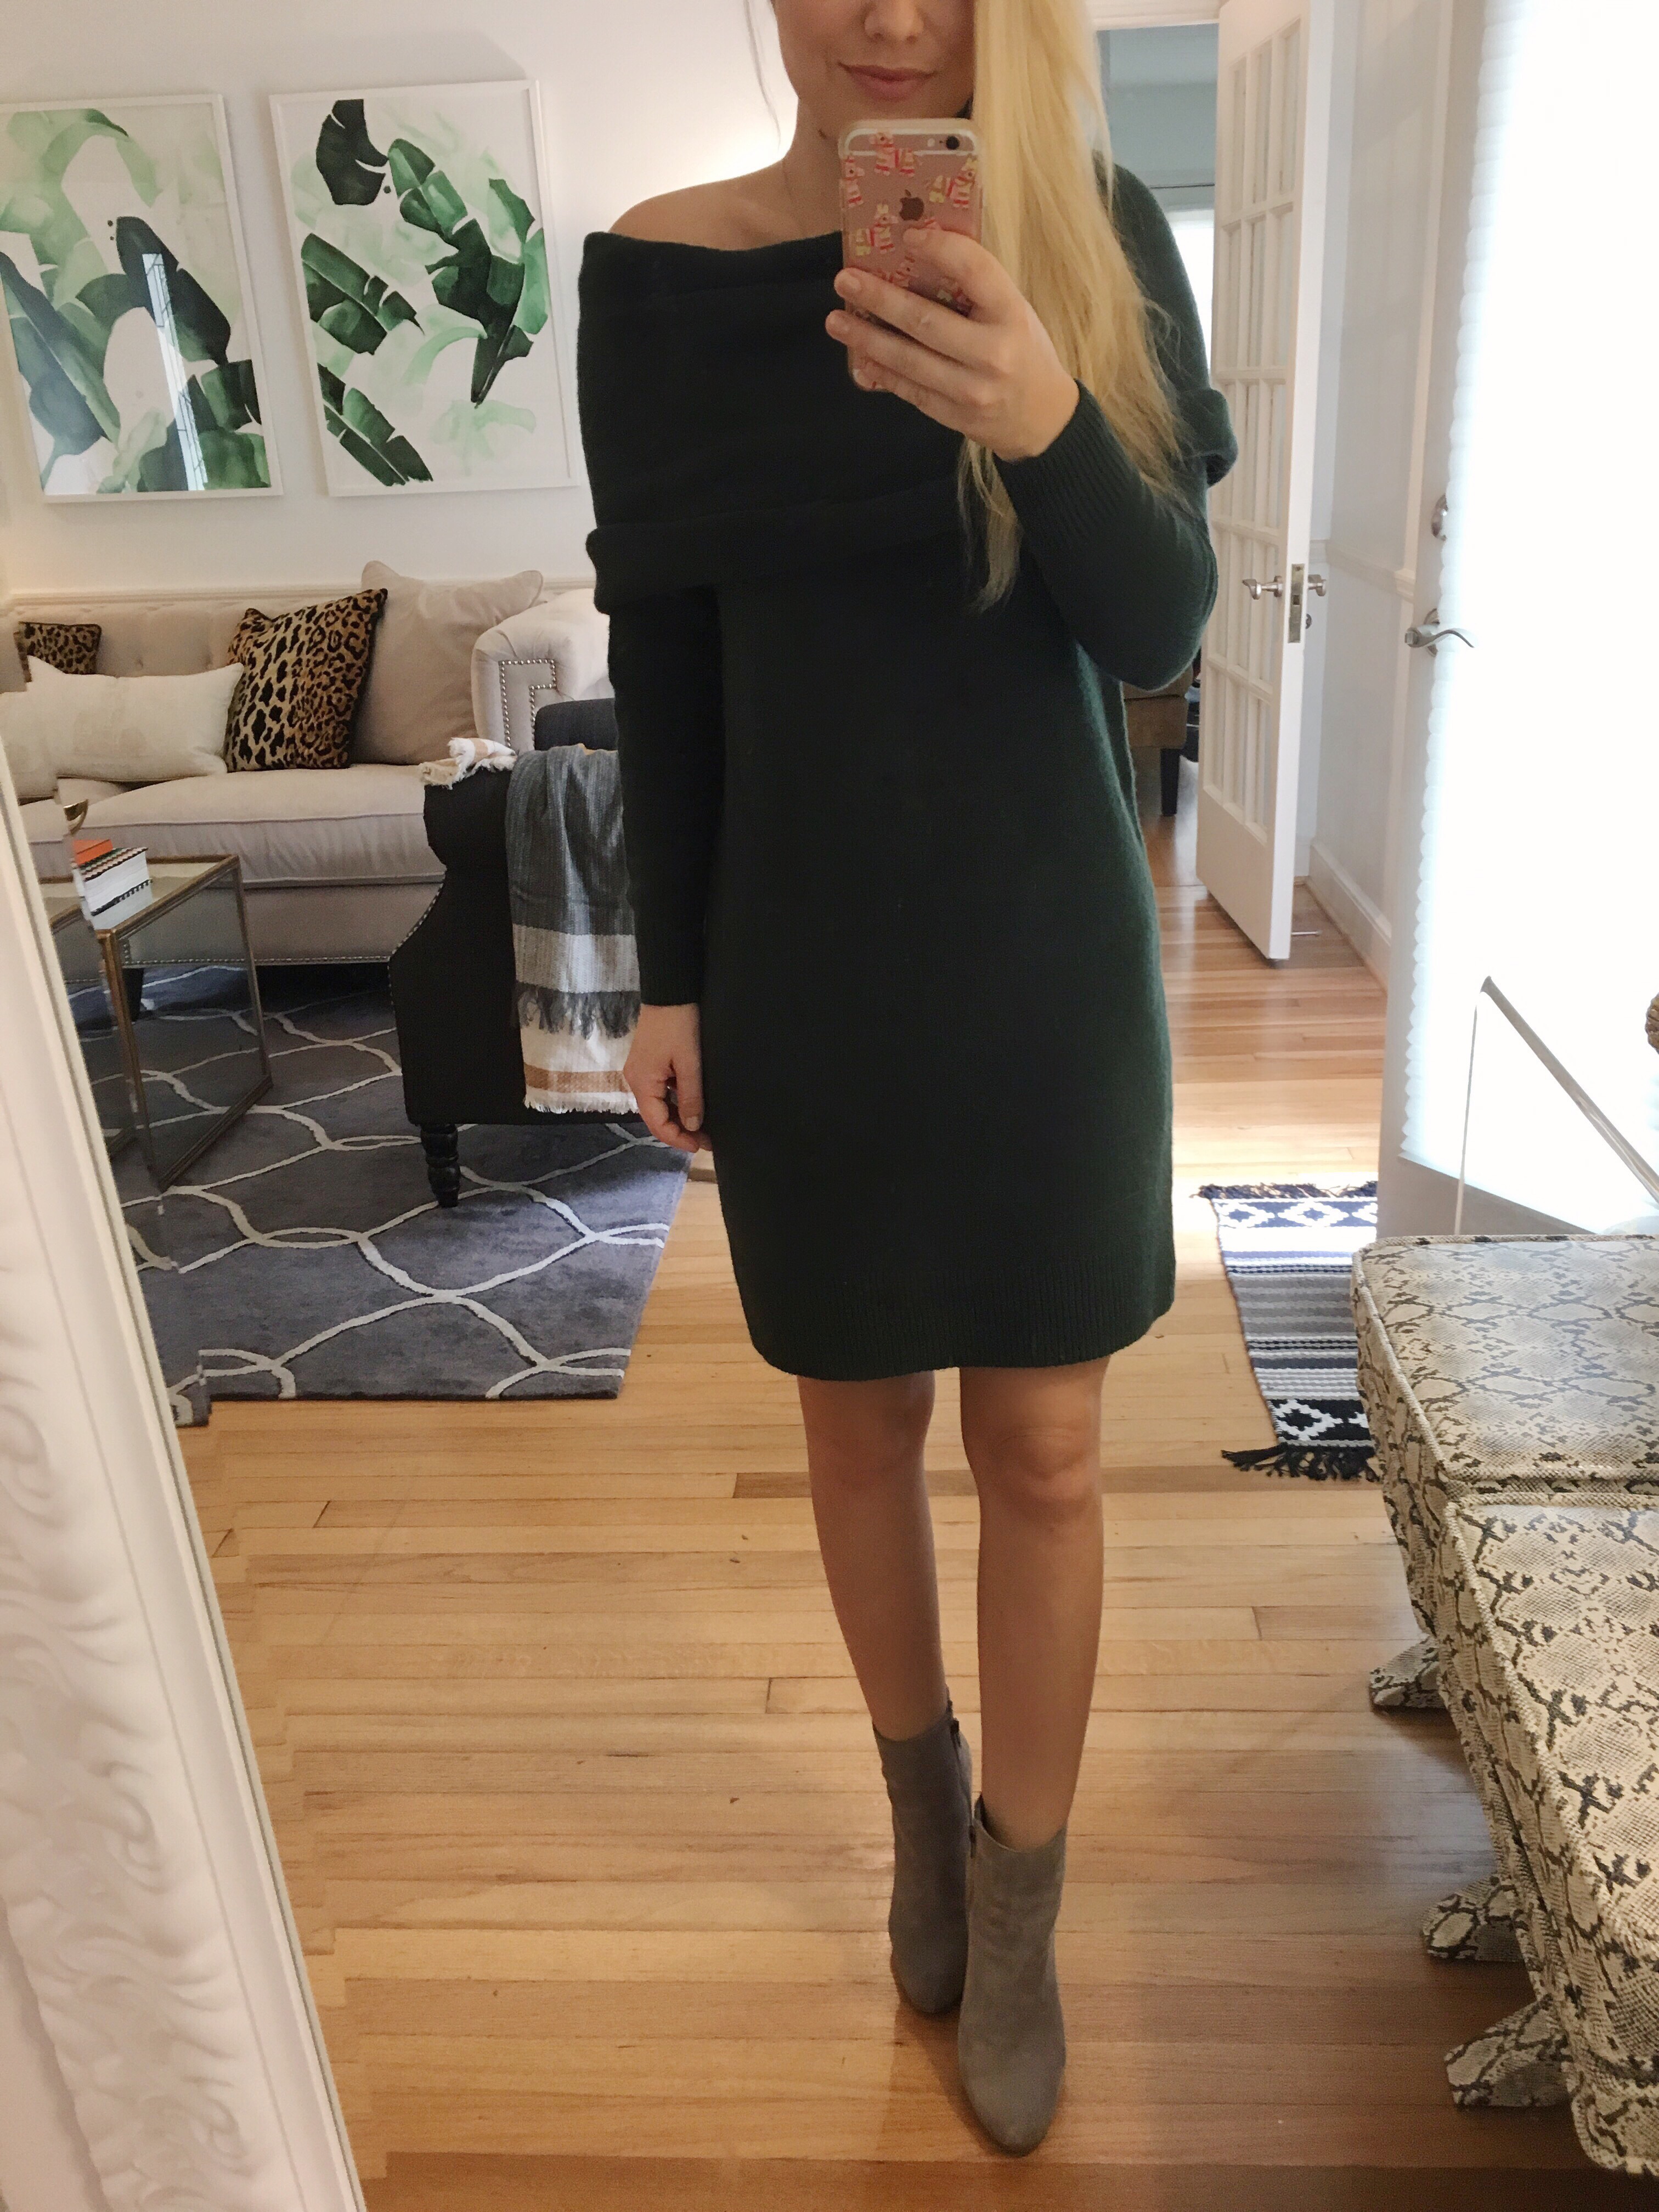 Sweater dress, off the shoulder sweater, off the shoulder sweater dress, boots, booties, nordstrom sweater, nordstrom sweater dress